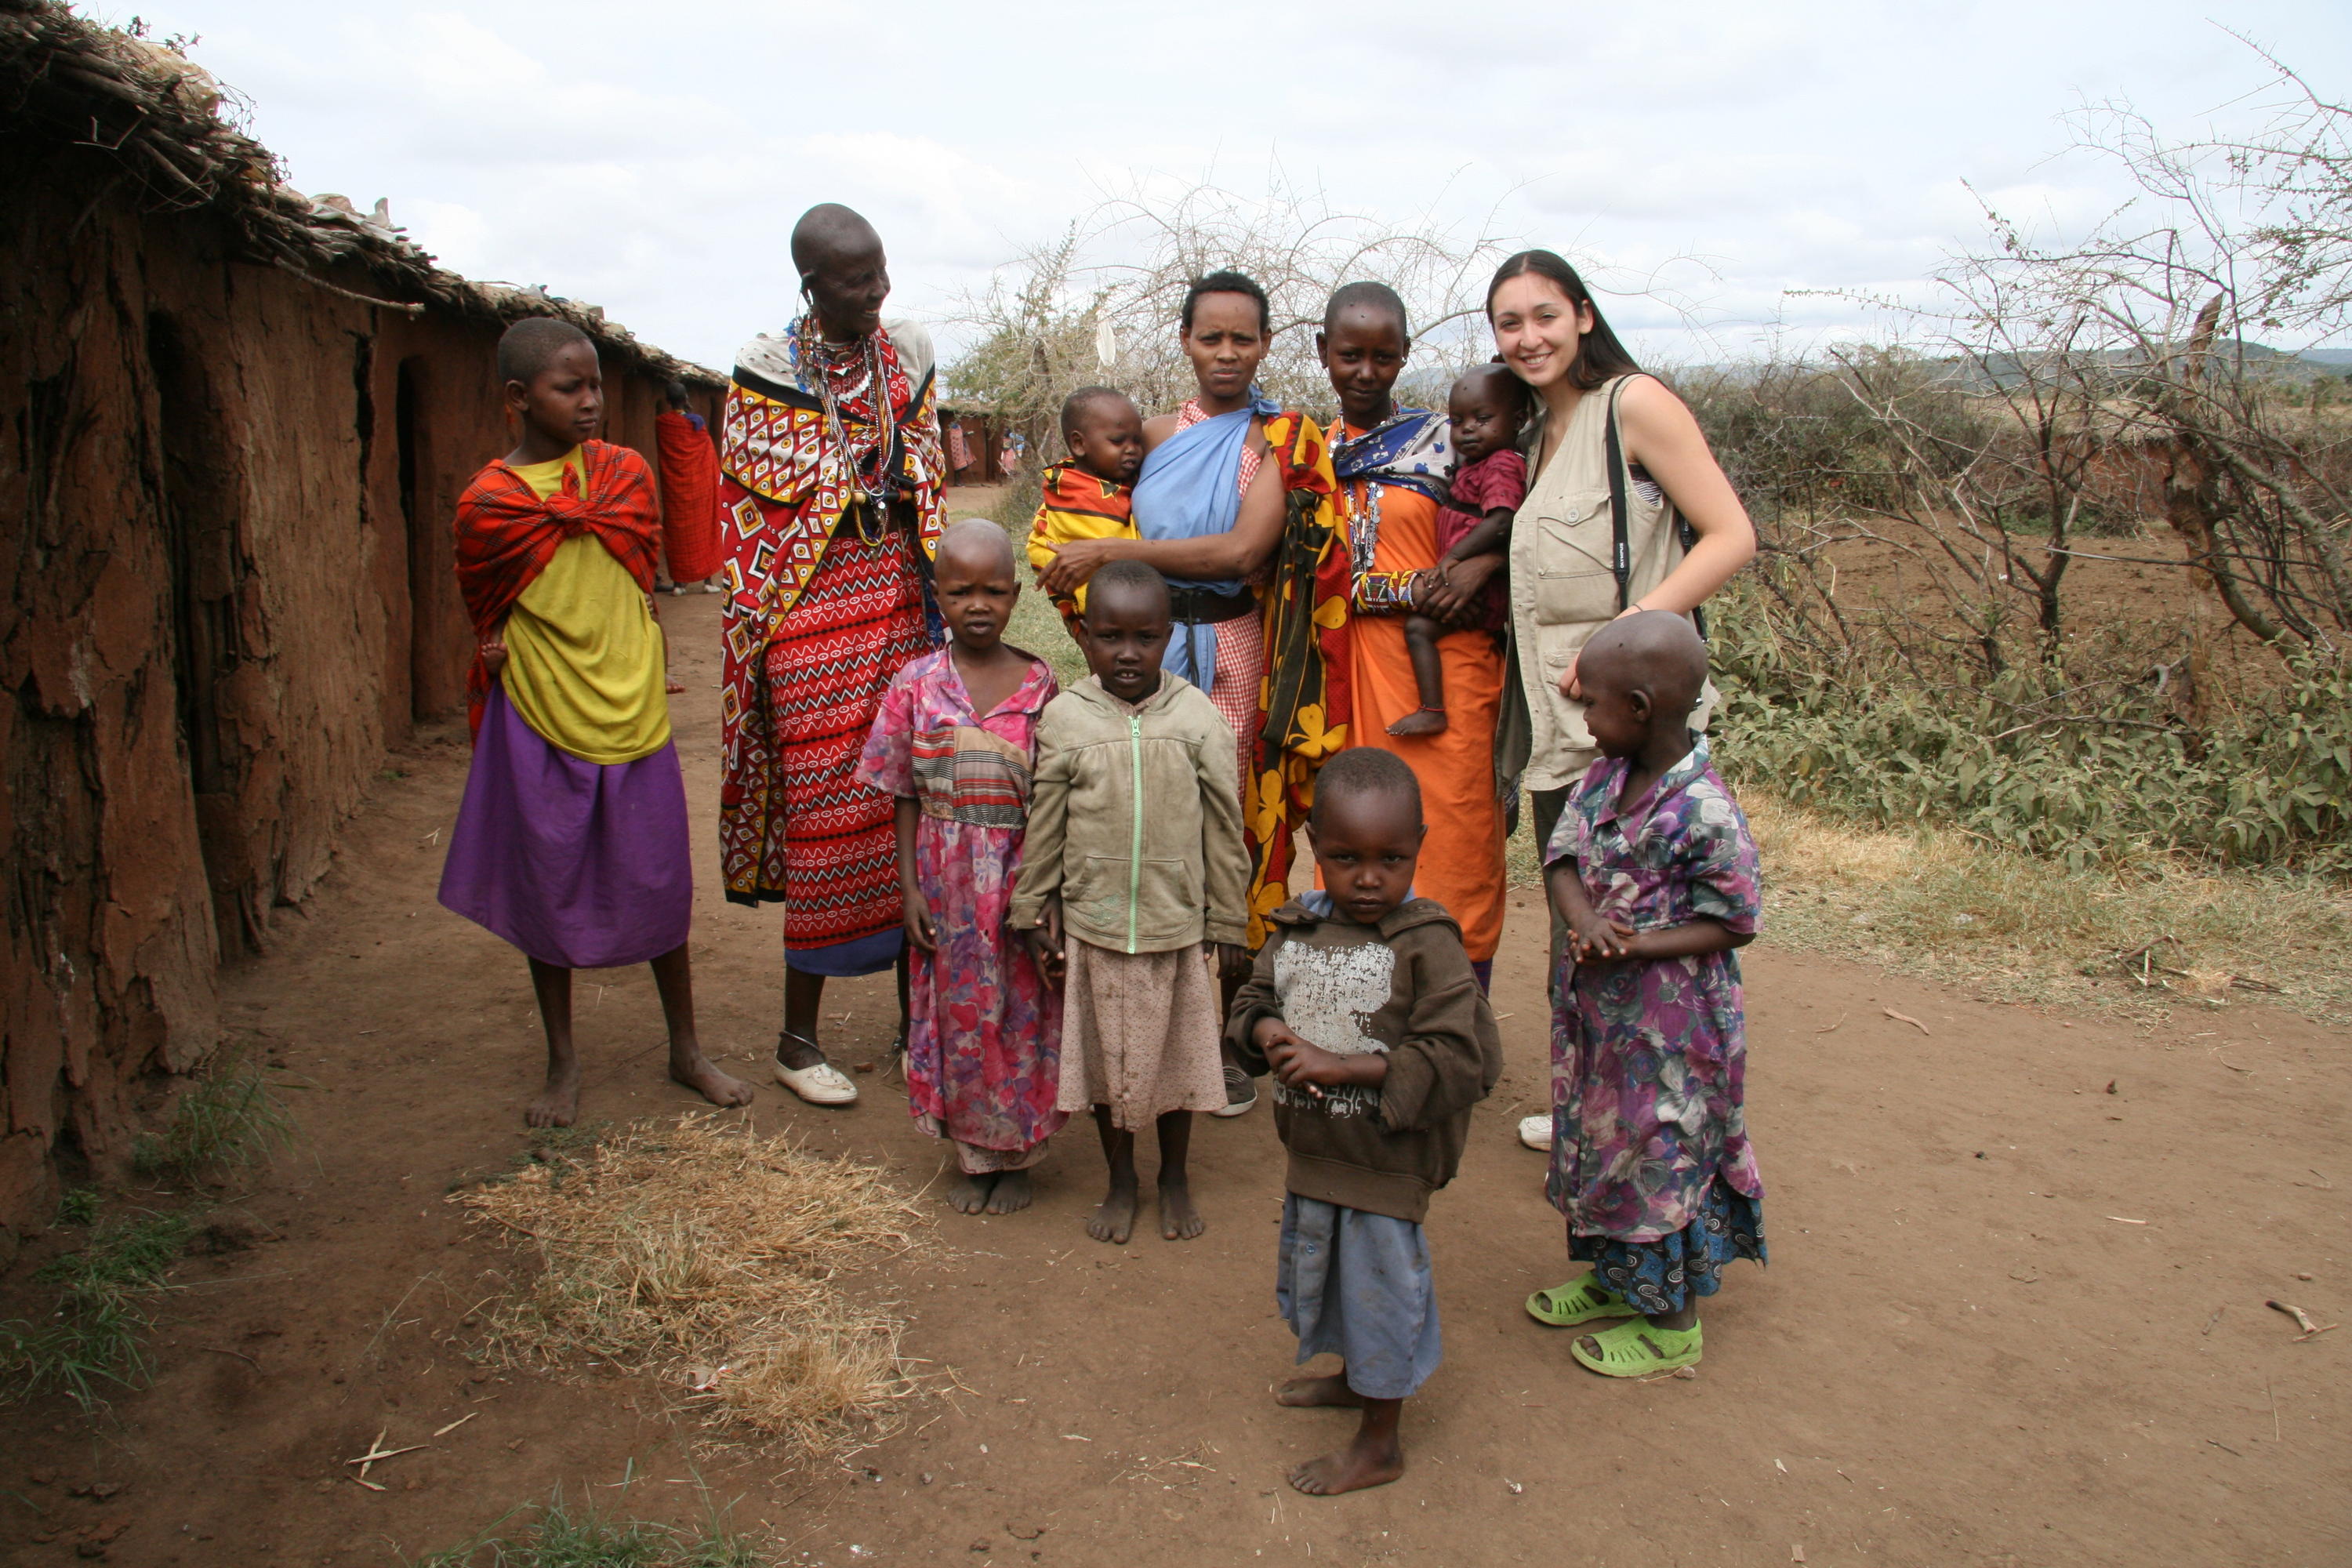 Elaine Ho in Africa with African villagers